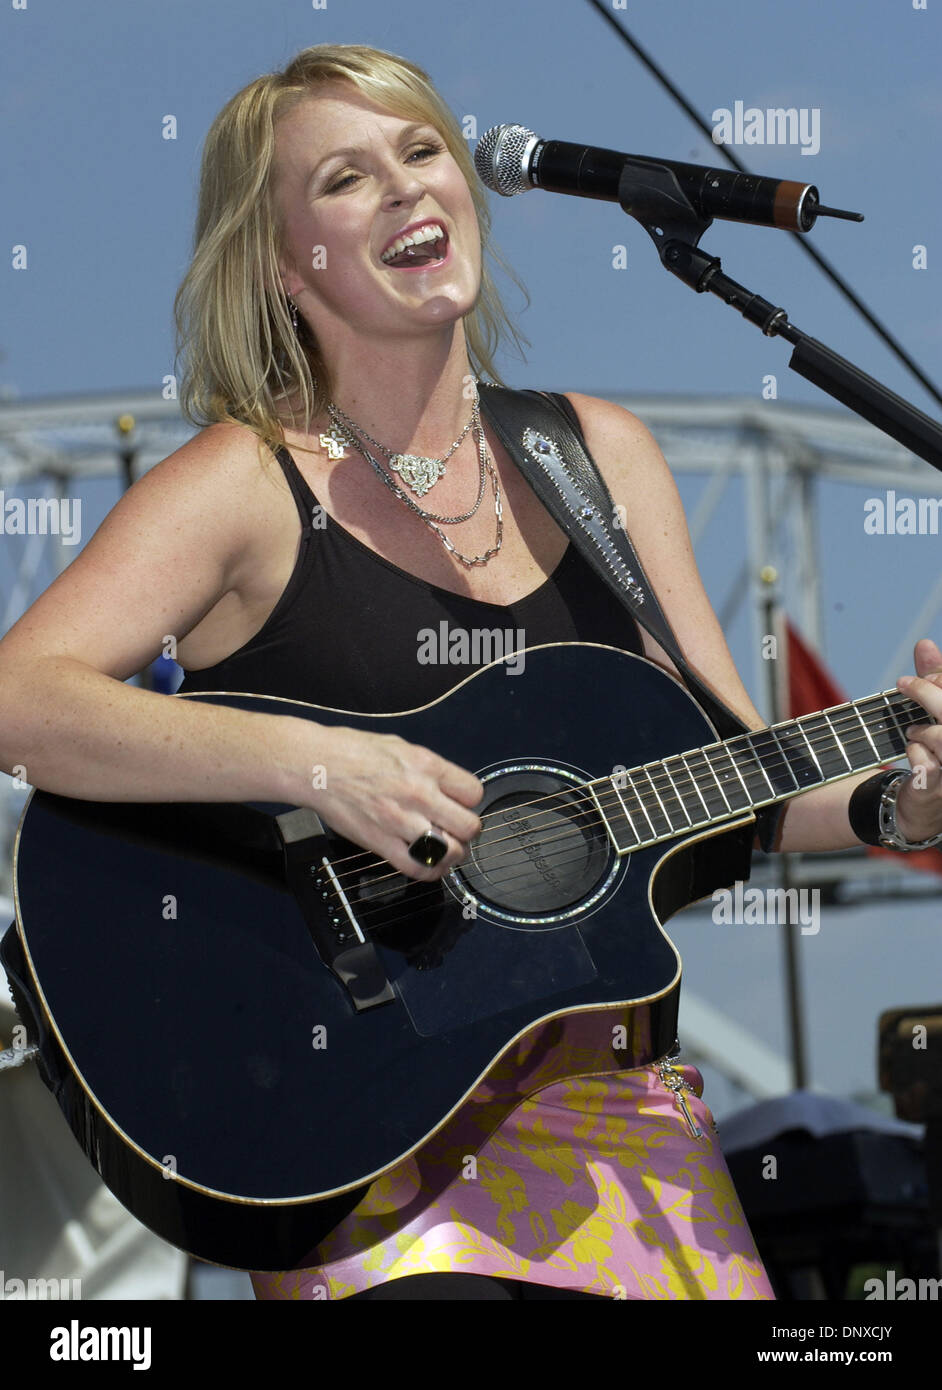 Jun 09, 2006 - Nashville, TN, USA - Musician CAROLYN DAWN JOHNSON performs live at the Riverfront Stage as part of the 2006 CMA Music Festival that took place in downtown Nashville. (Credit Image: © Jason Moore/ZUMA Press) Stock Photo